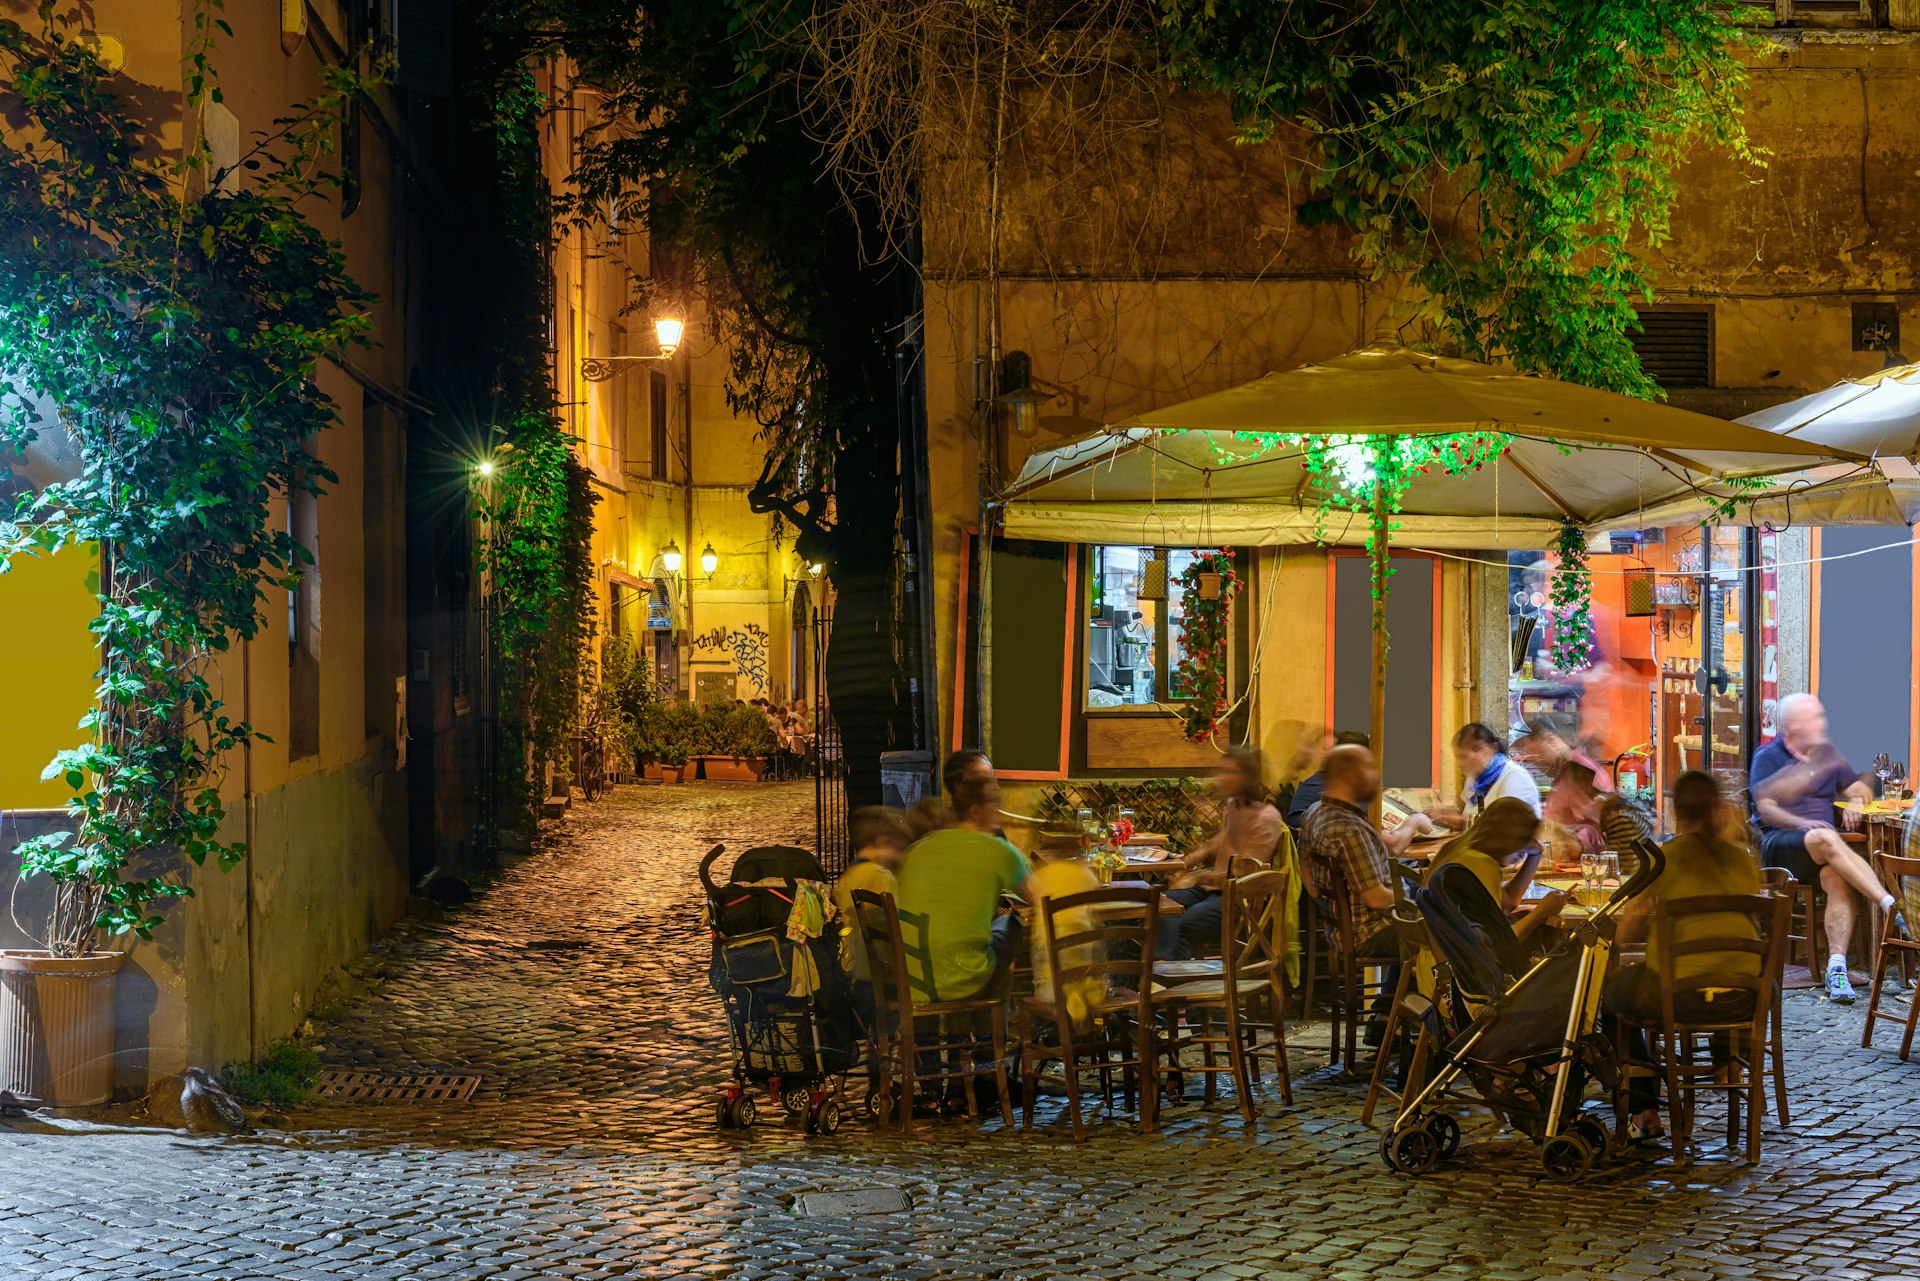 Night view of old street in Trastevere in Rome, Italy